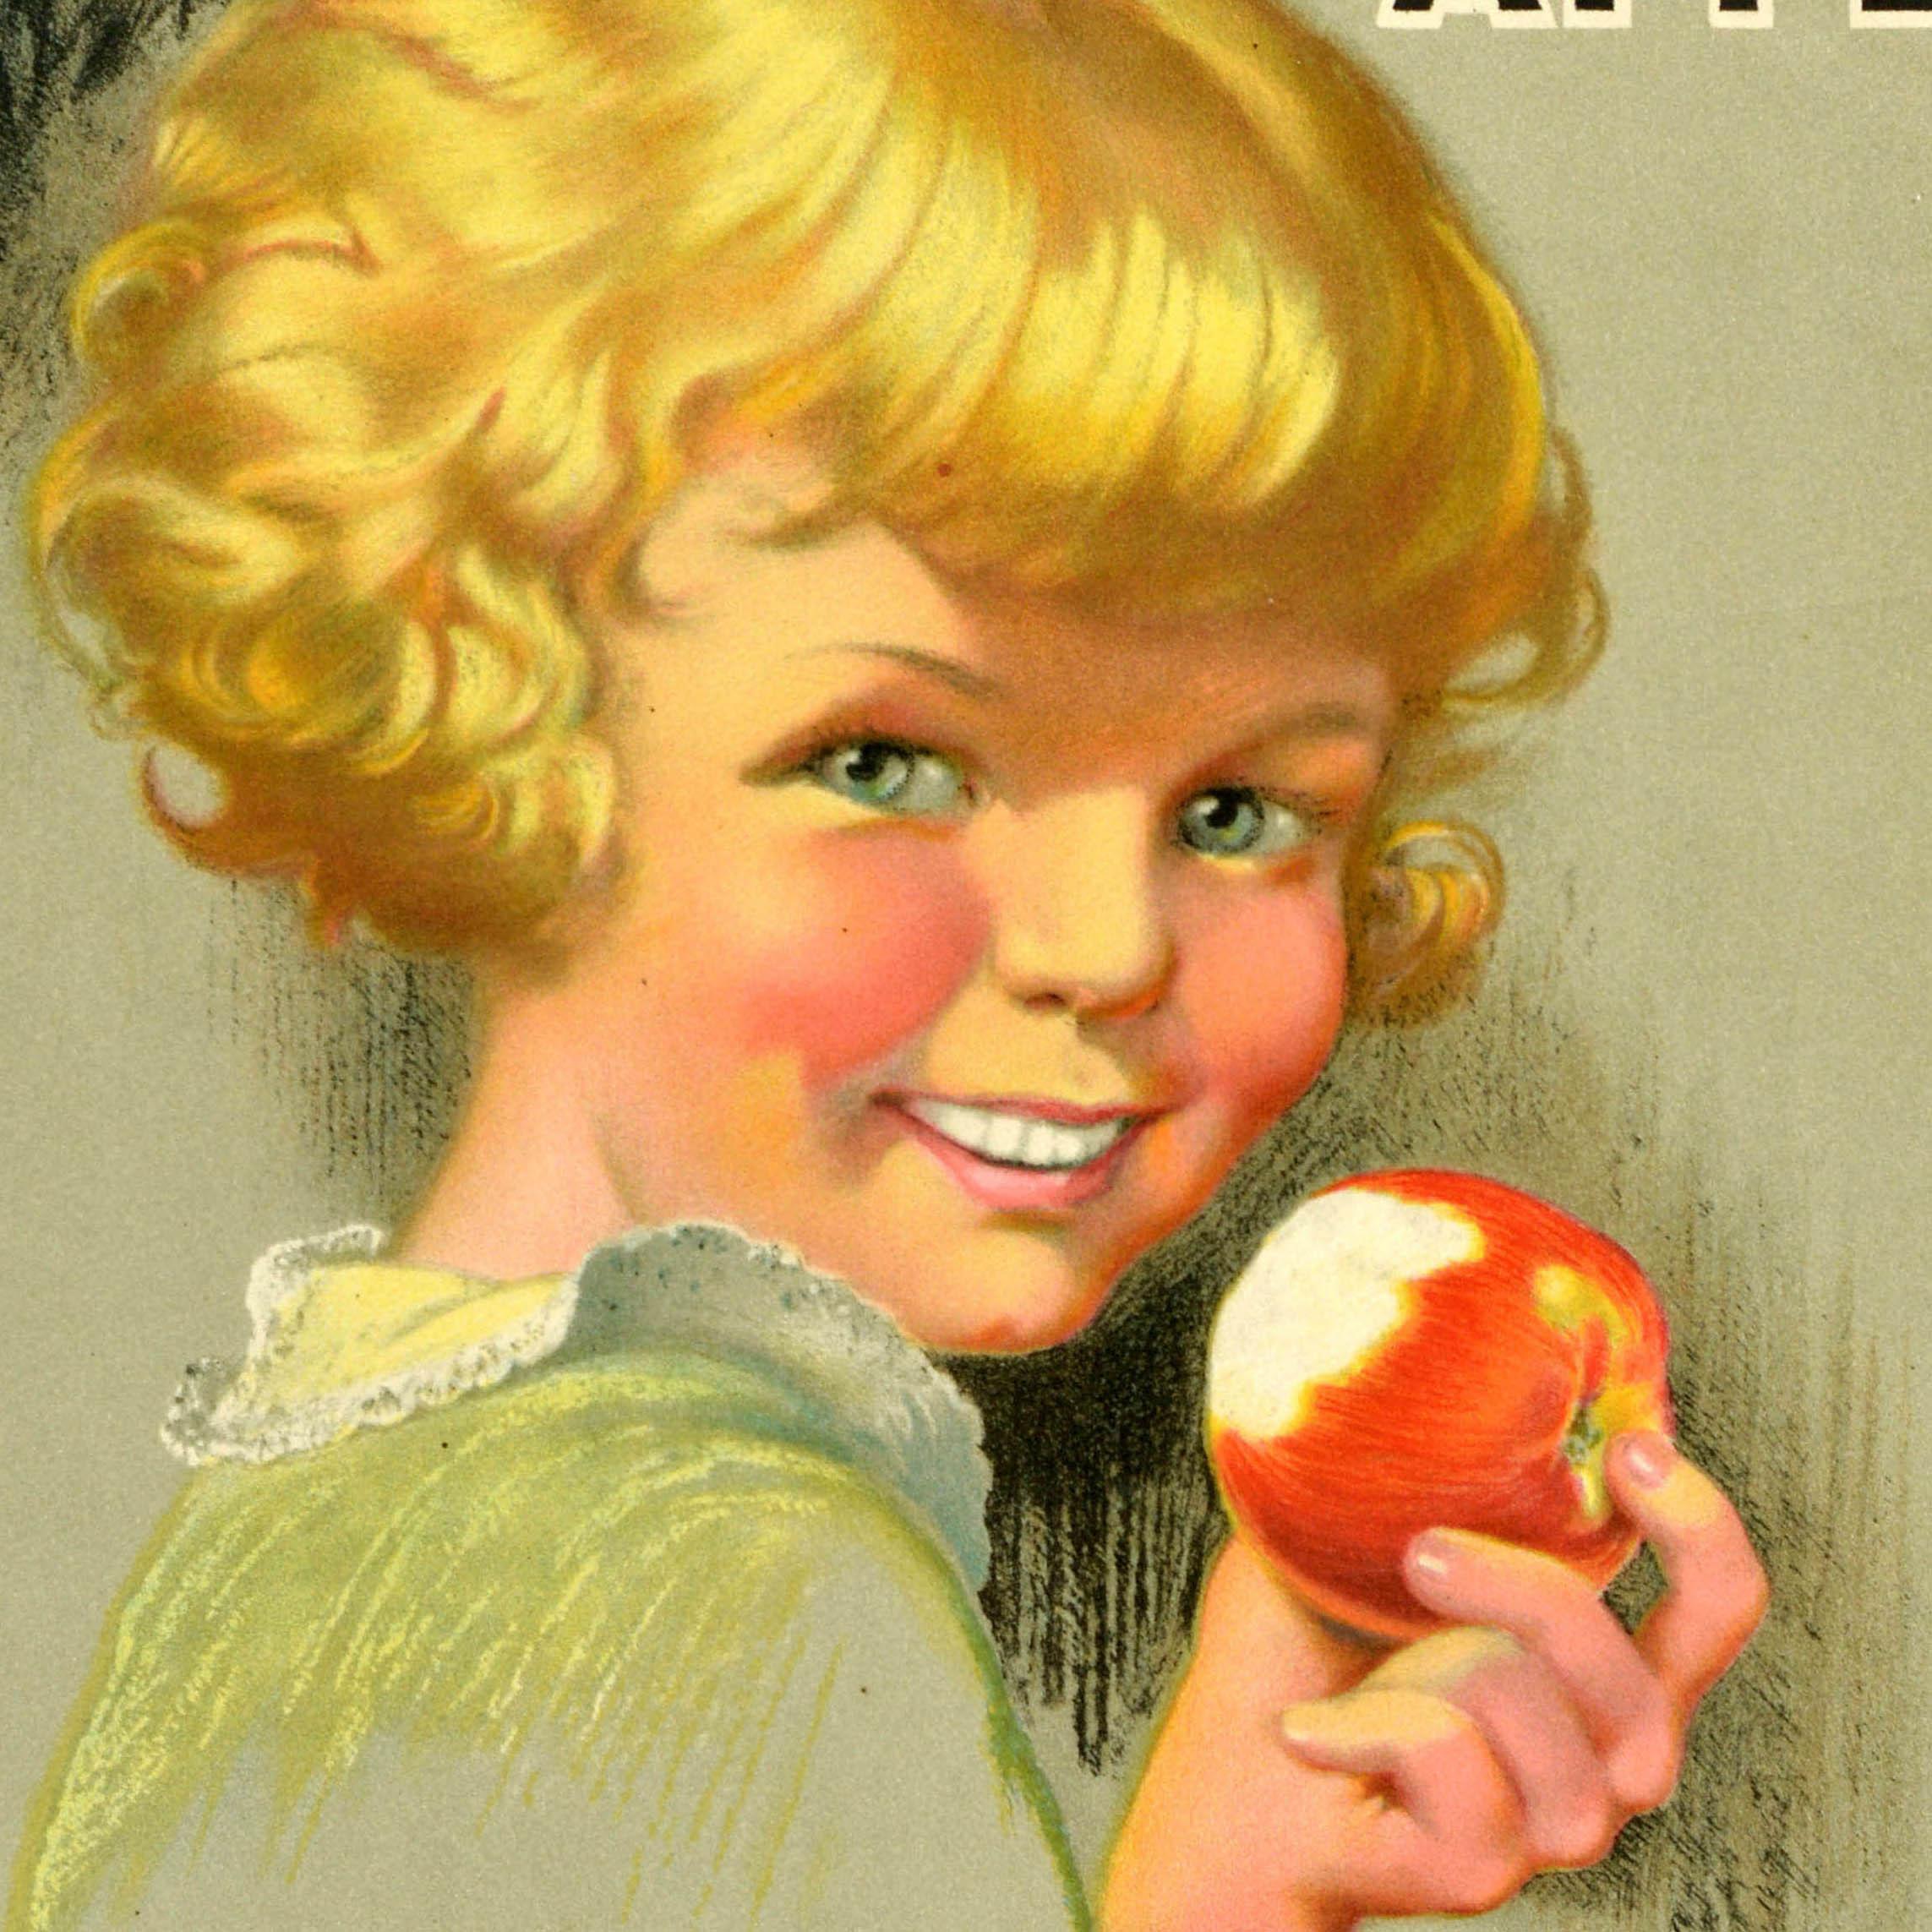 Original Vintage Food Advertising Poster Canadian Apples For Health And Beauty - Print by Unknown